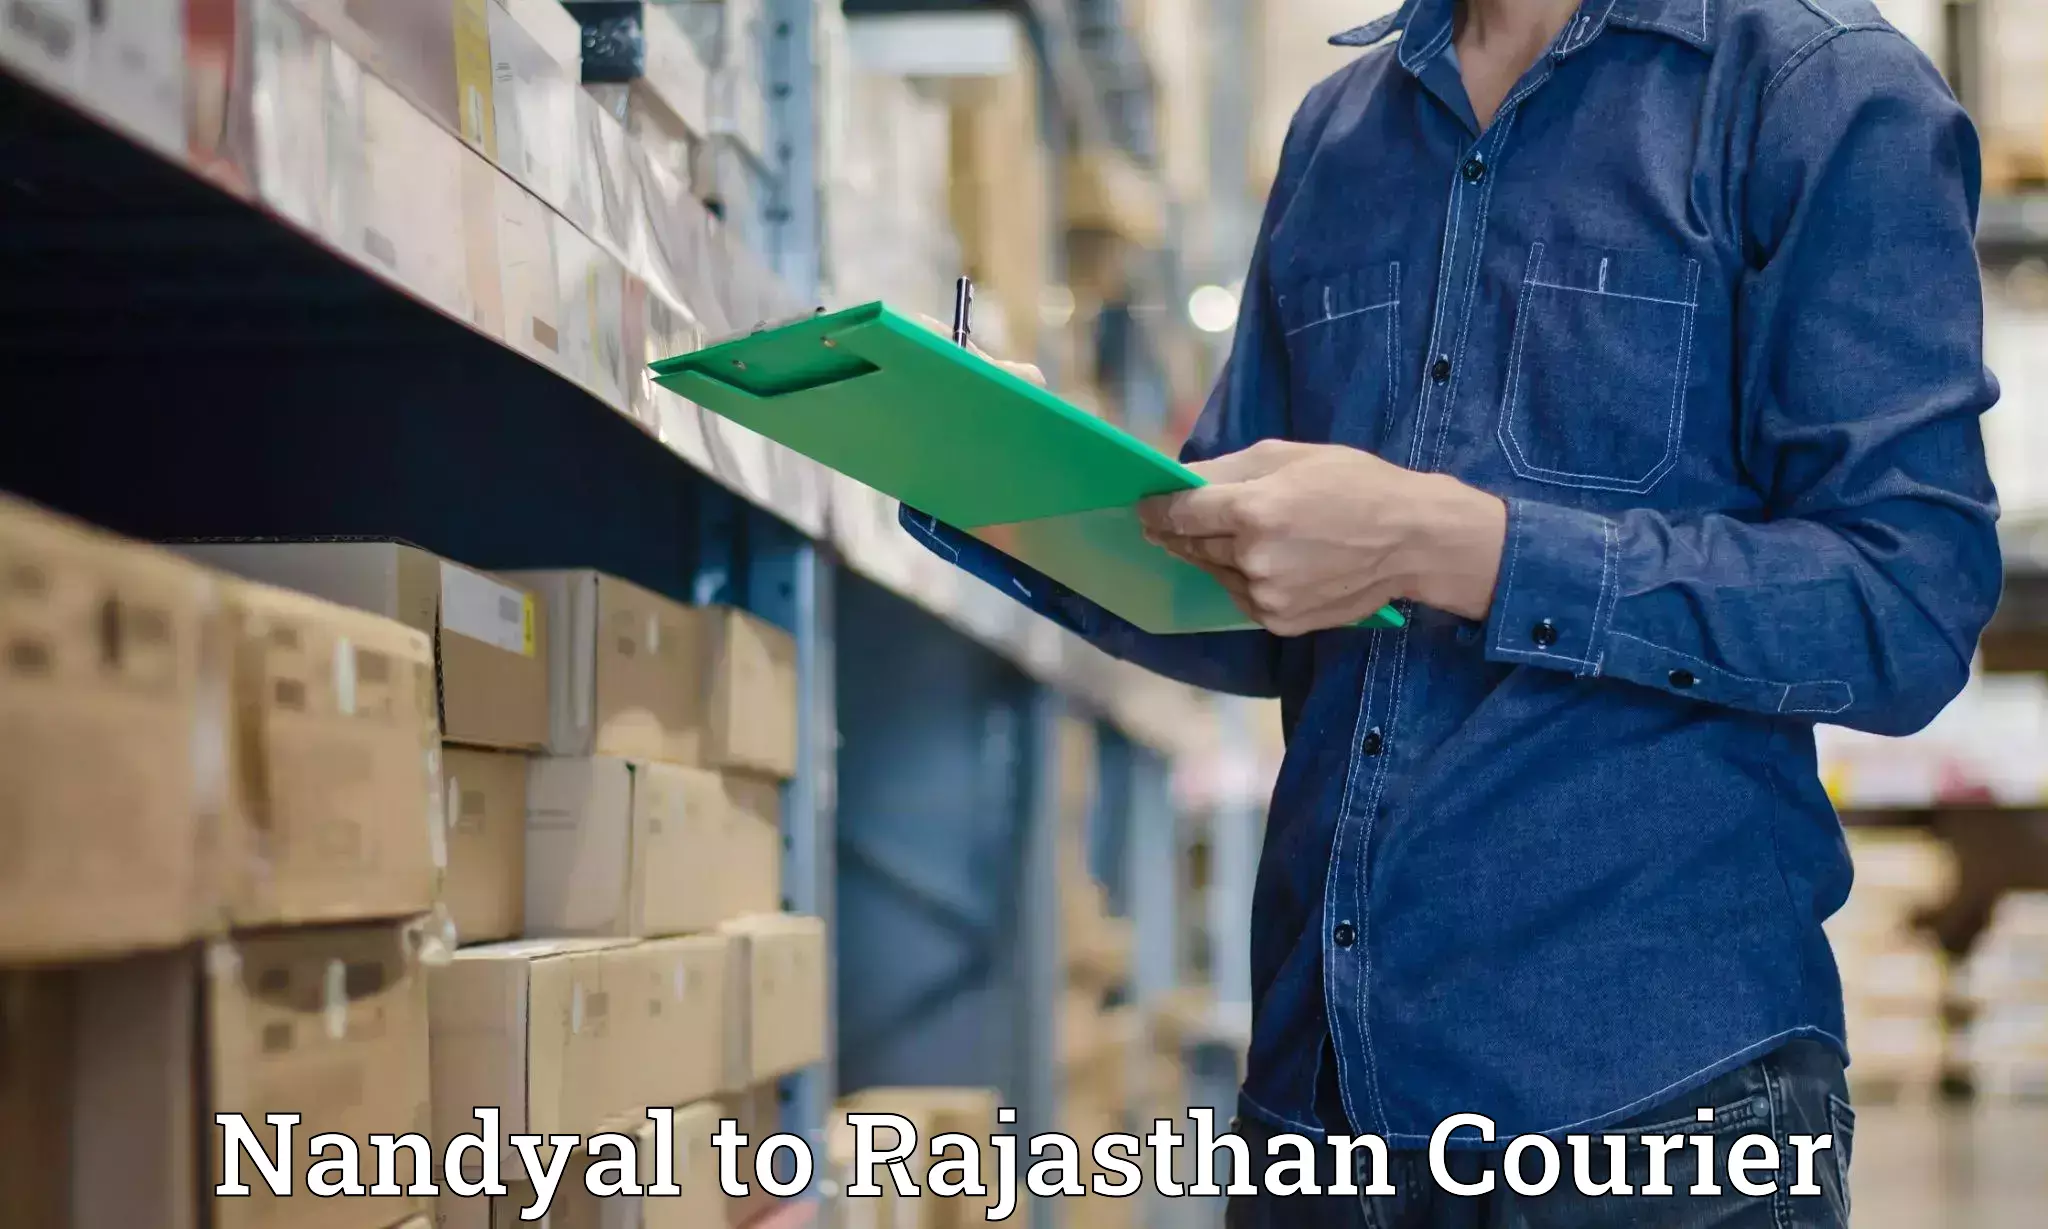 State-of-the-art courier technology Nandyal to Rajasthan